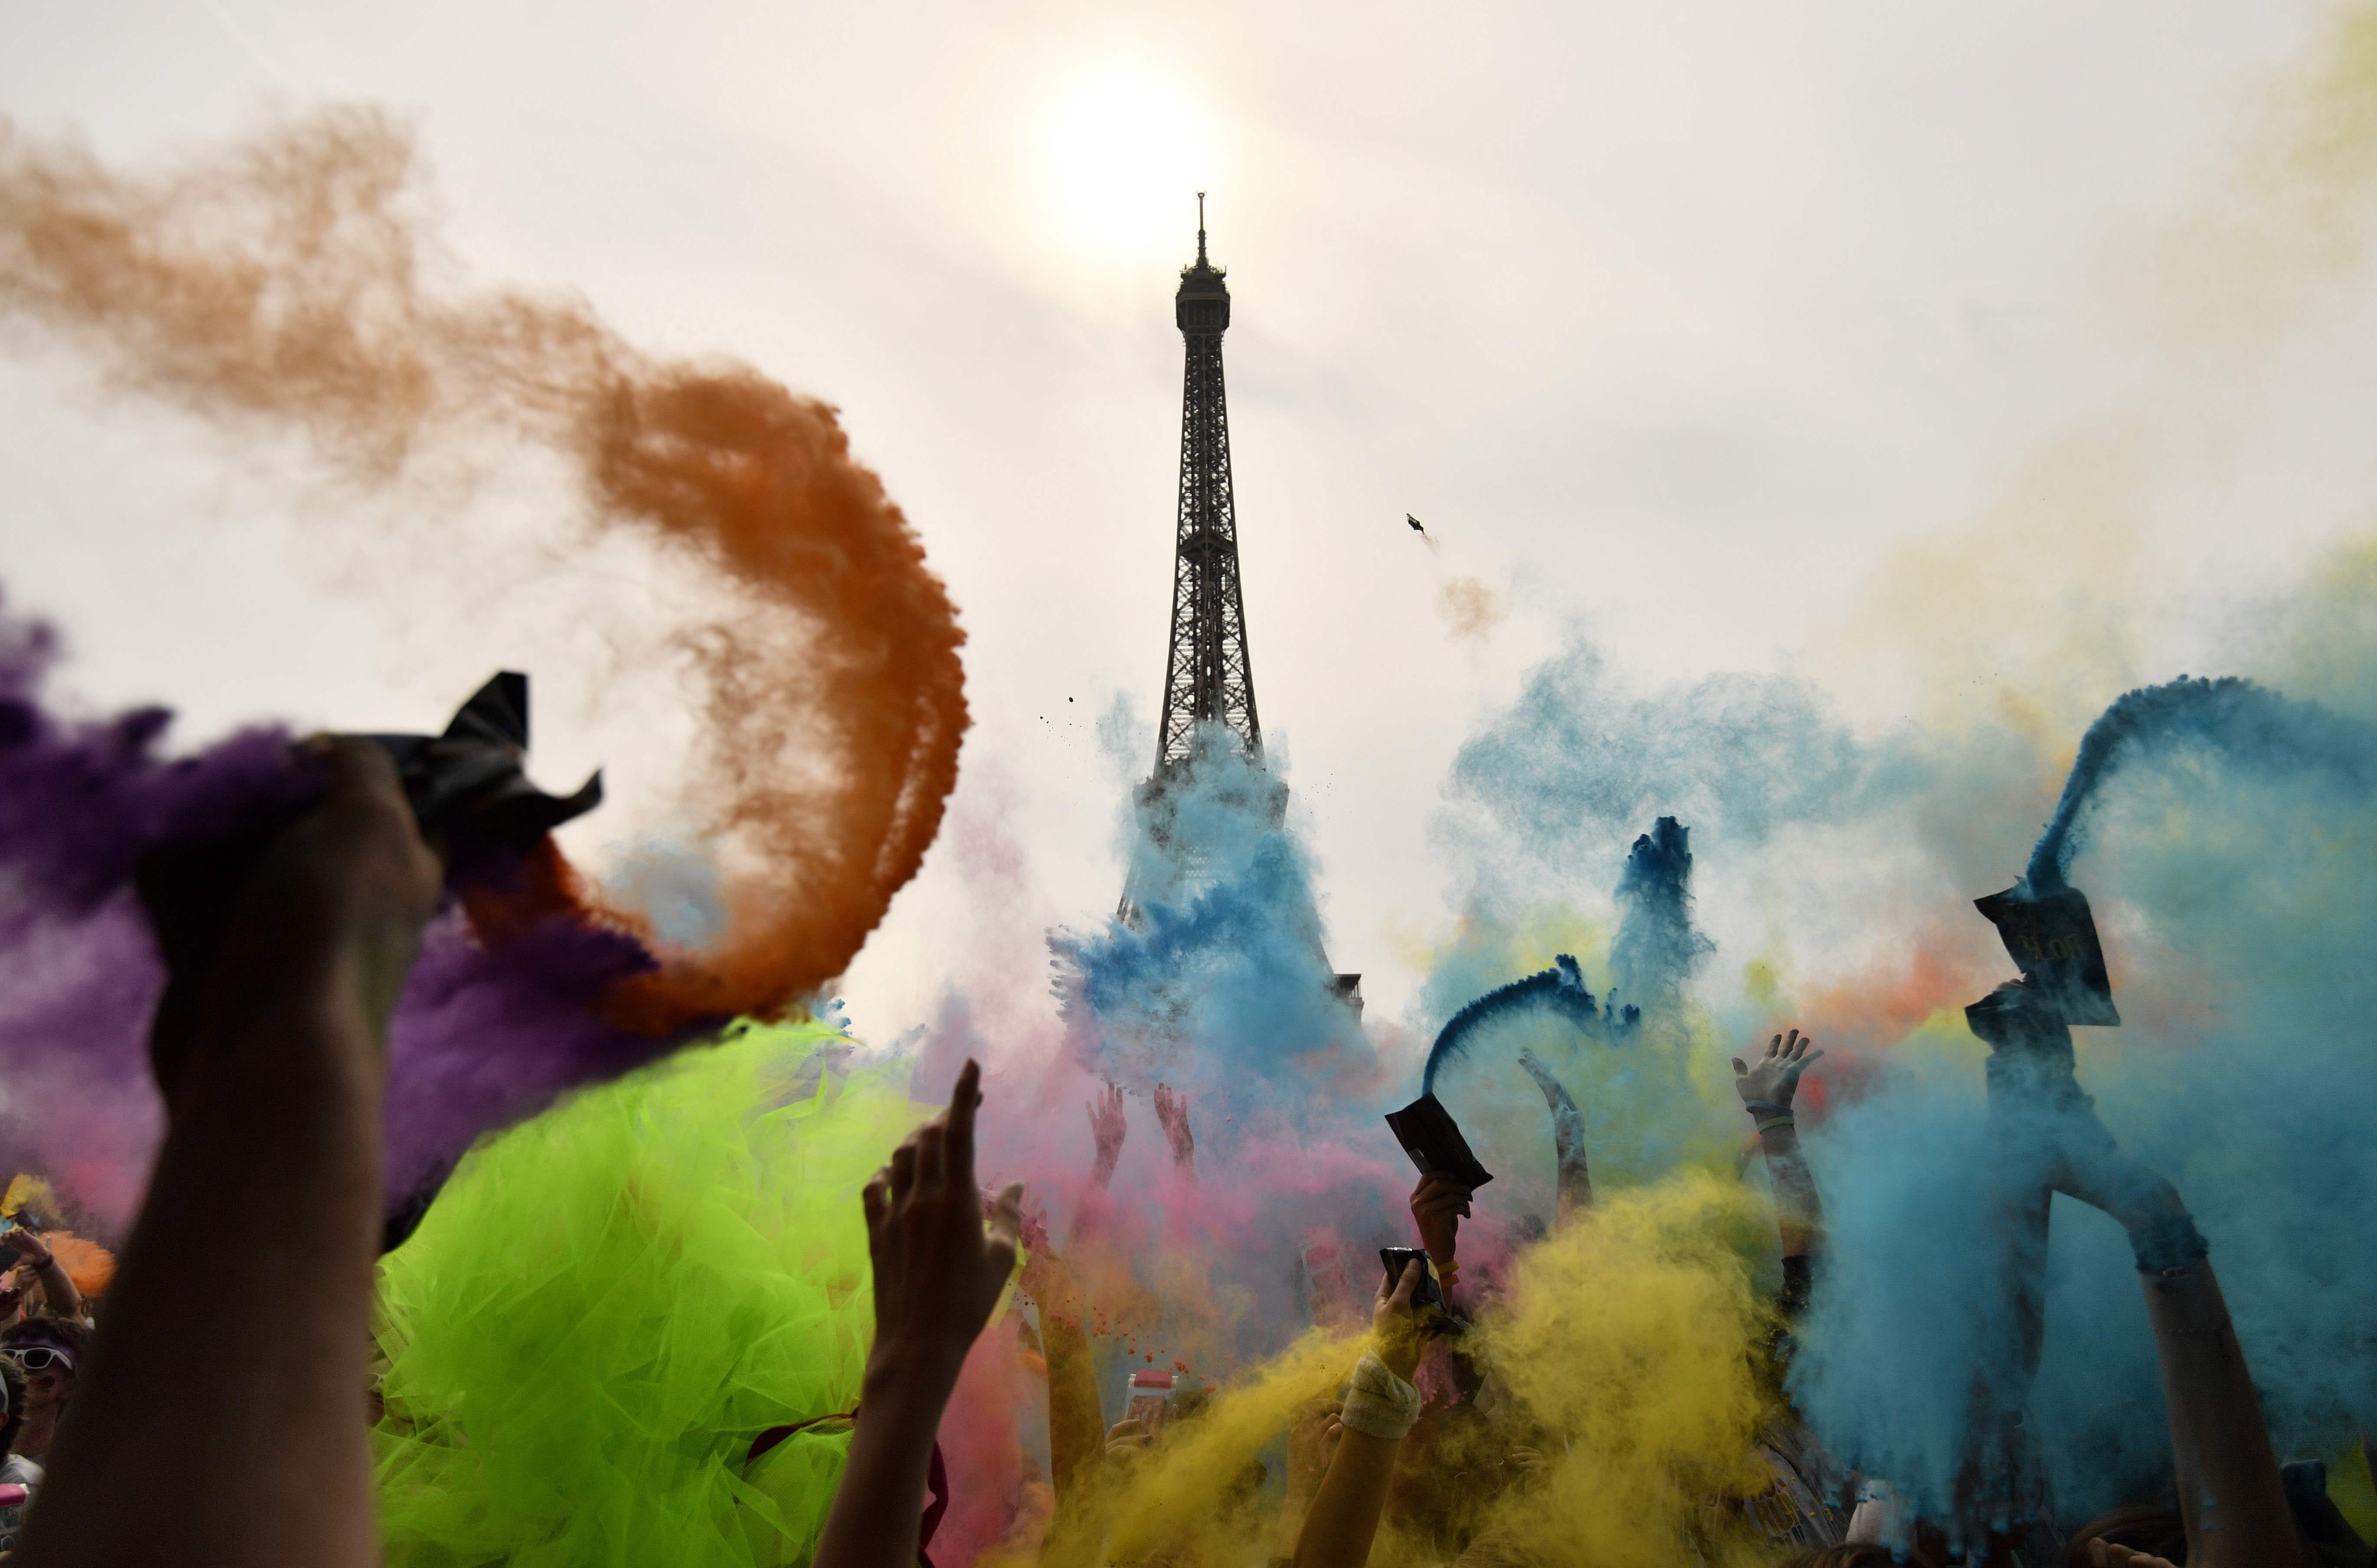 People throw colored powder as they celebrate at the end of the Color Run 2018 race in front of the Eiffel Tower in Paris, on April 15, 2018.The Color Run is a three mile paint race without winners nor prizes, while runners are showered with colored 